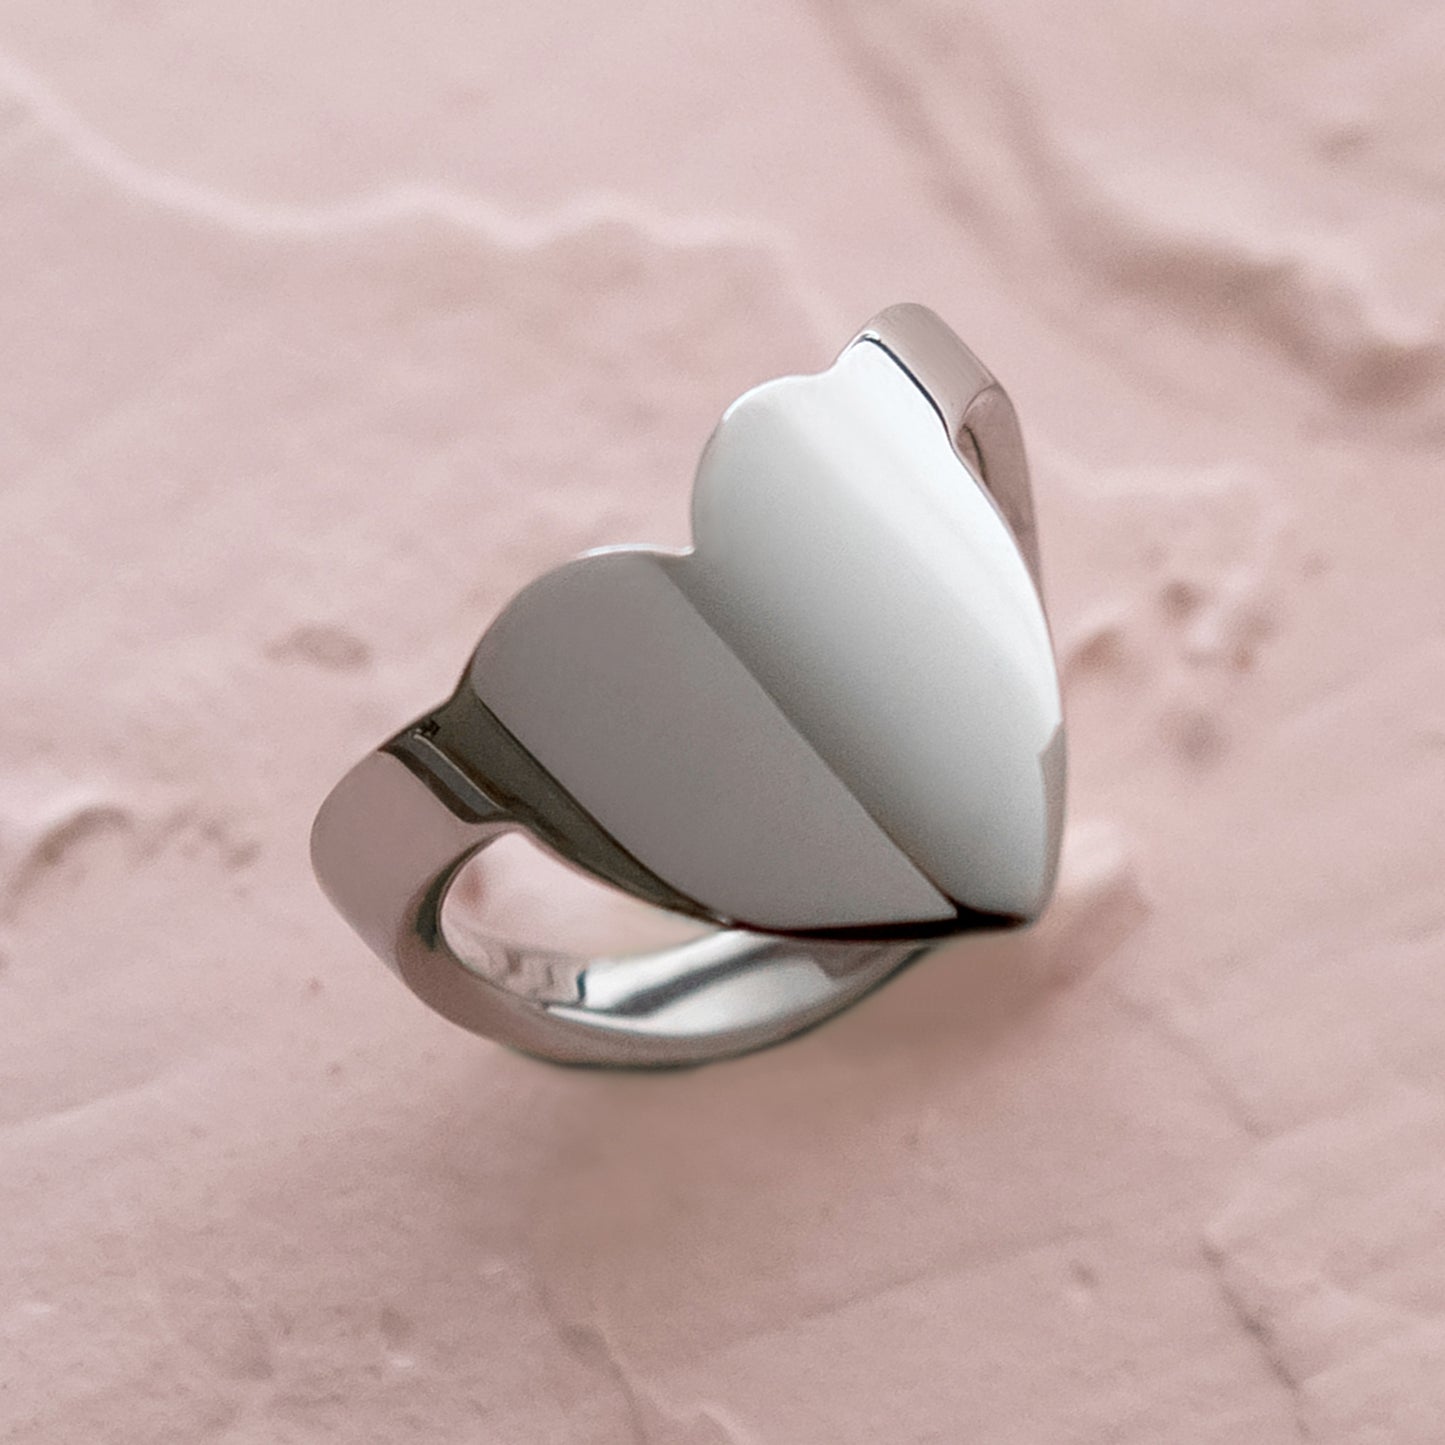 Stainless Steel Heart Shaped Thumb Ring for Women